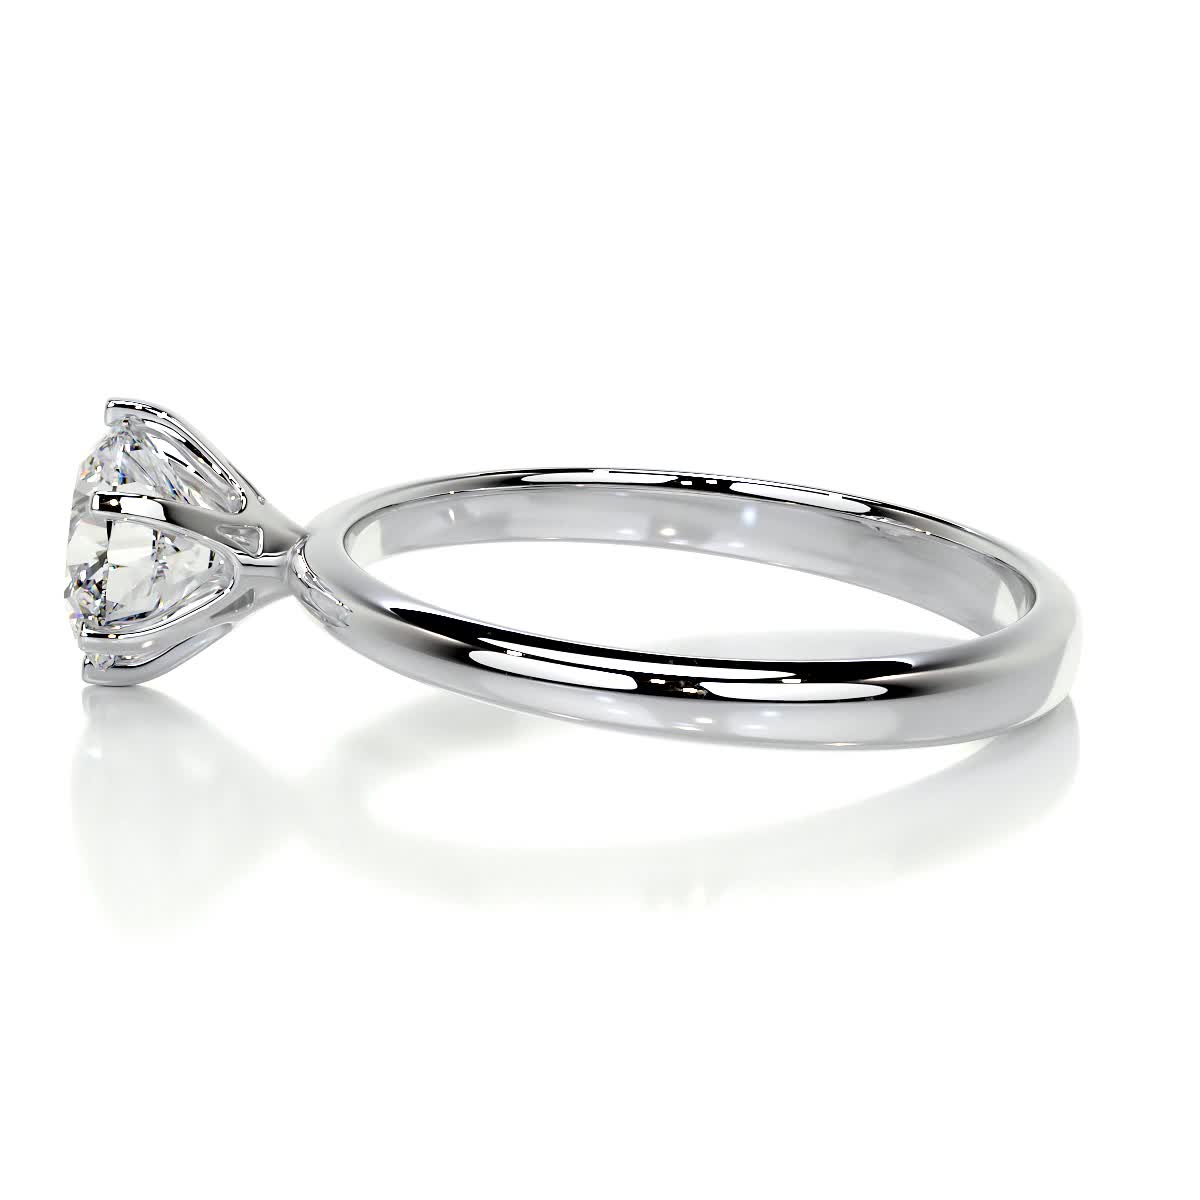 1.0 CT Round Solitaire CVD E/VS2 Diamond Engagement Ring 5